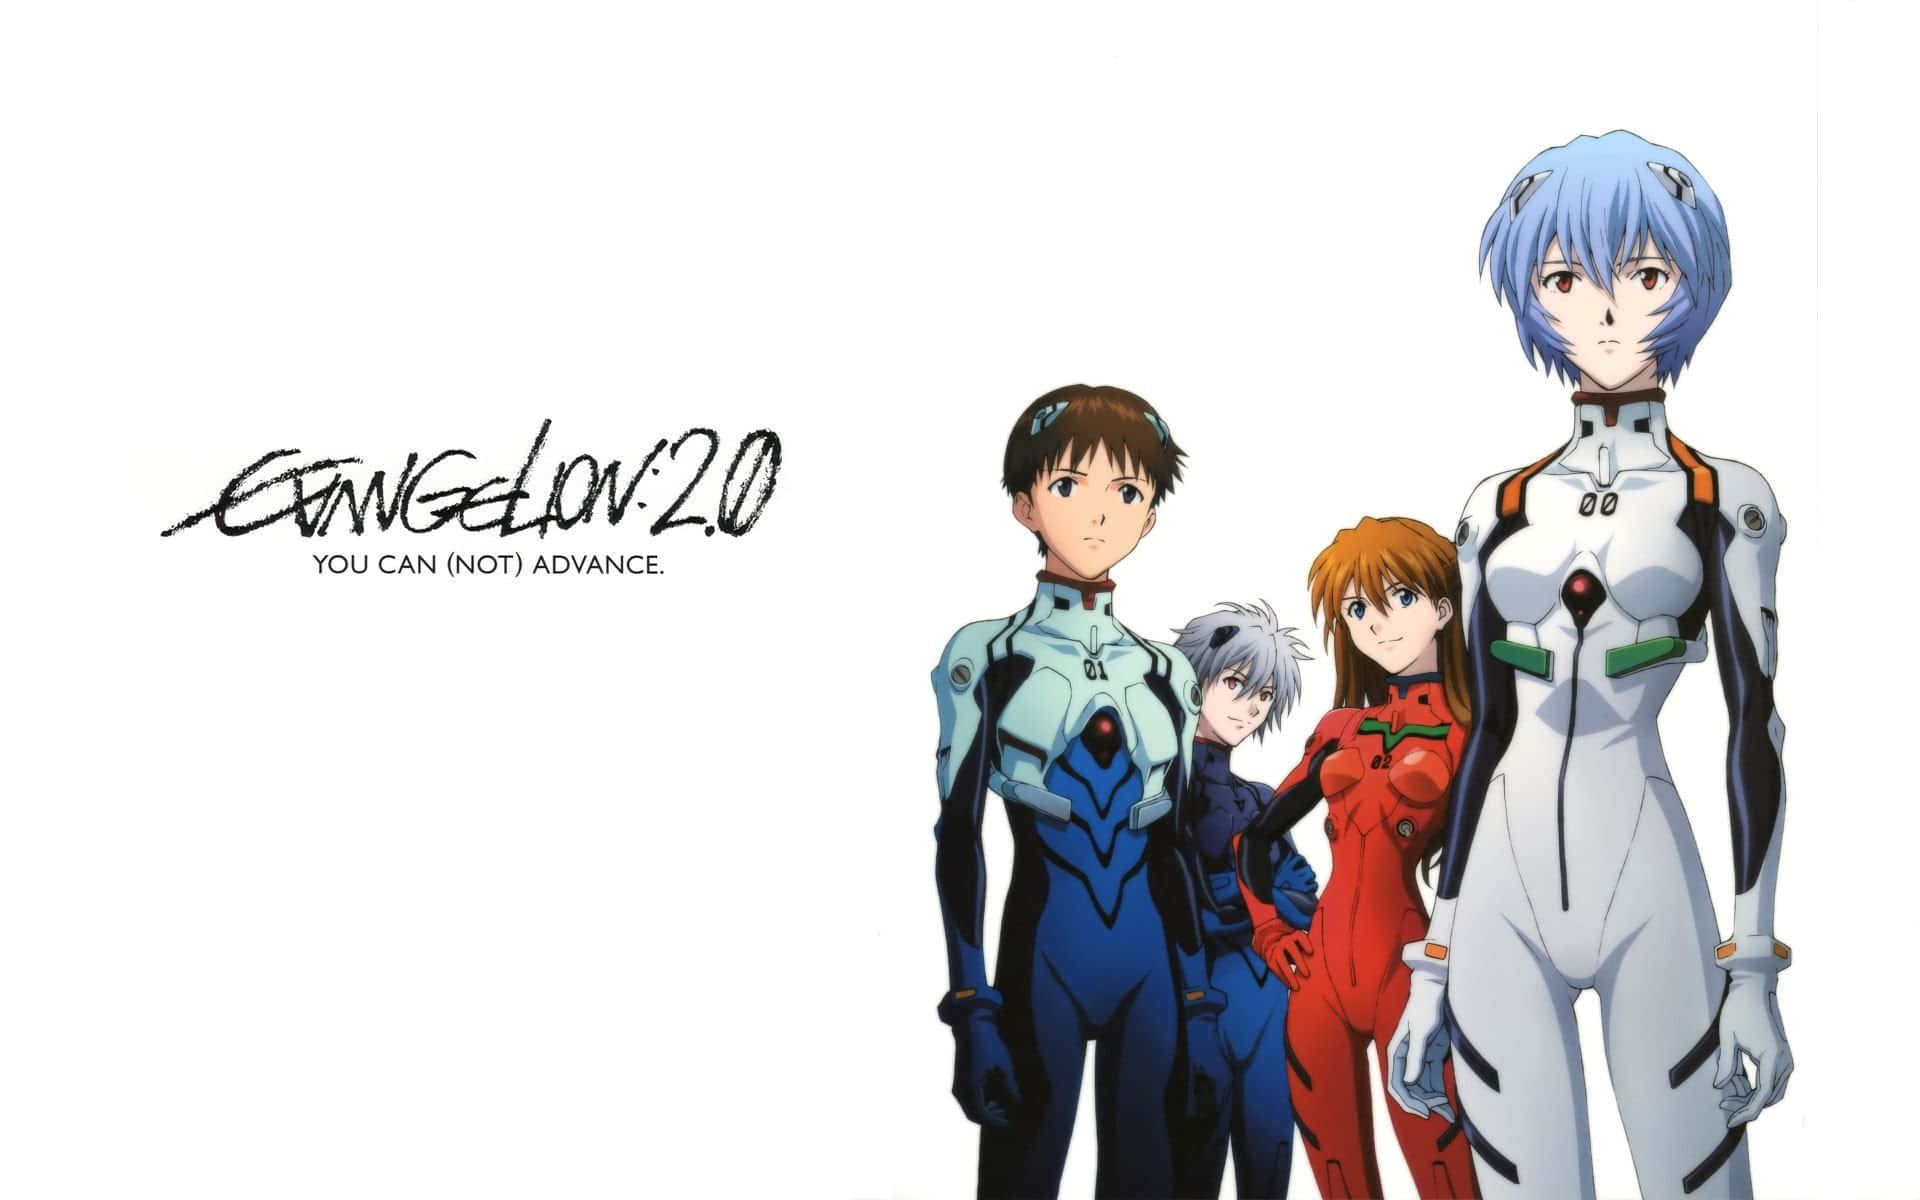 Rei Ayanami contemplating in deep thought. Wallpaper